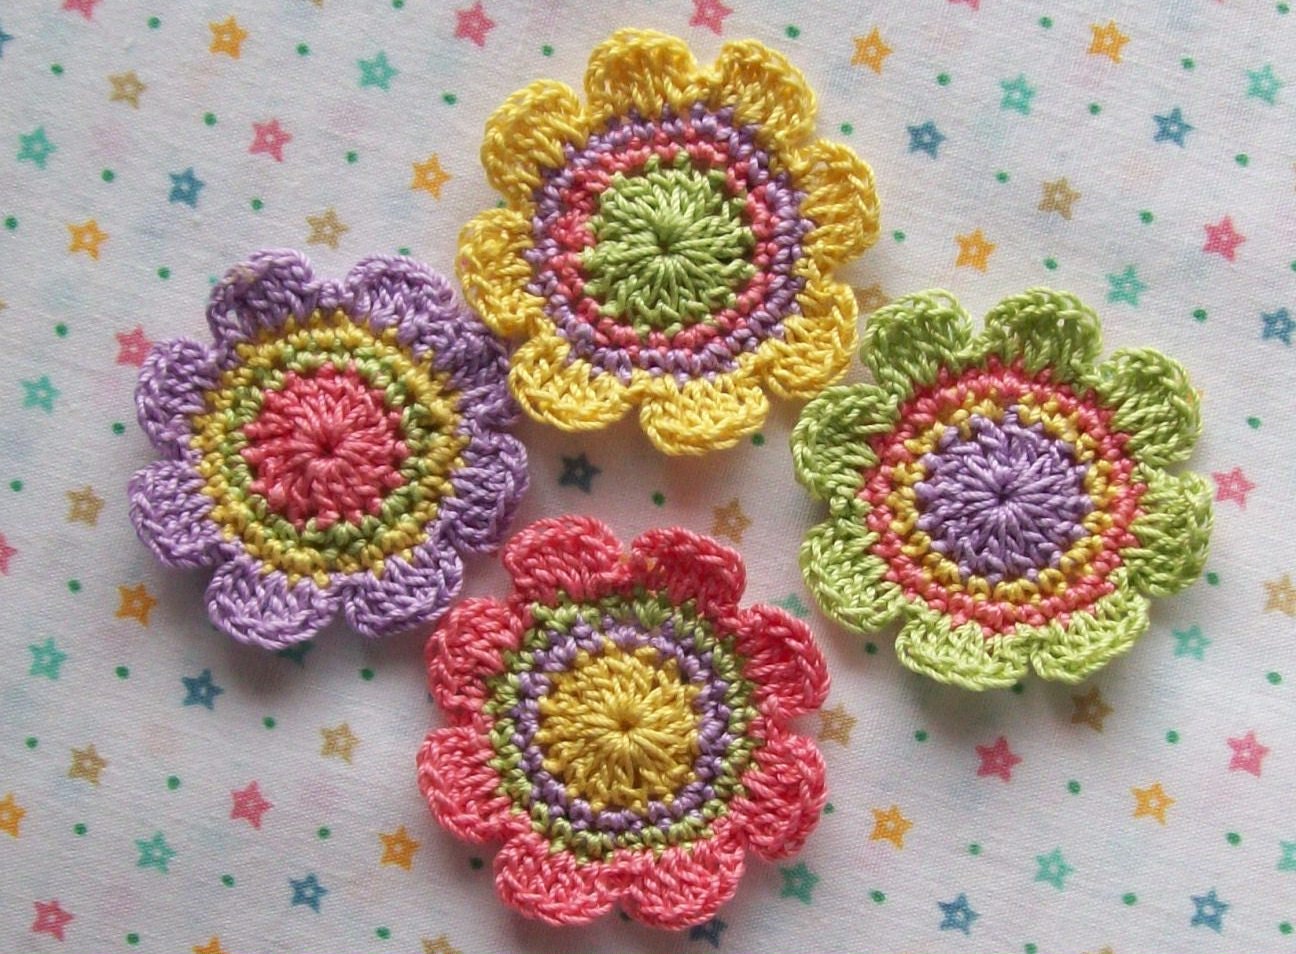 Crocheted Flower Links - InReach - Business class colocation and